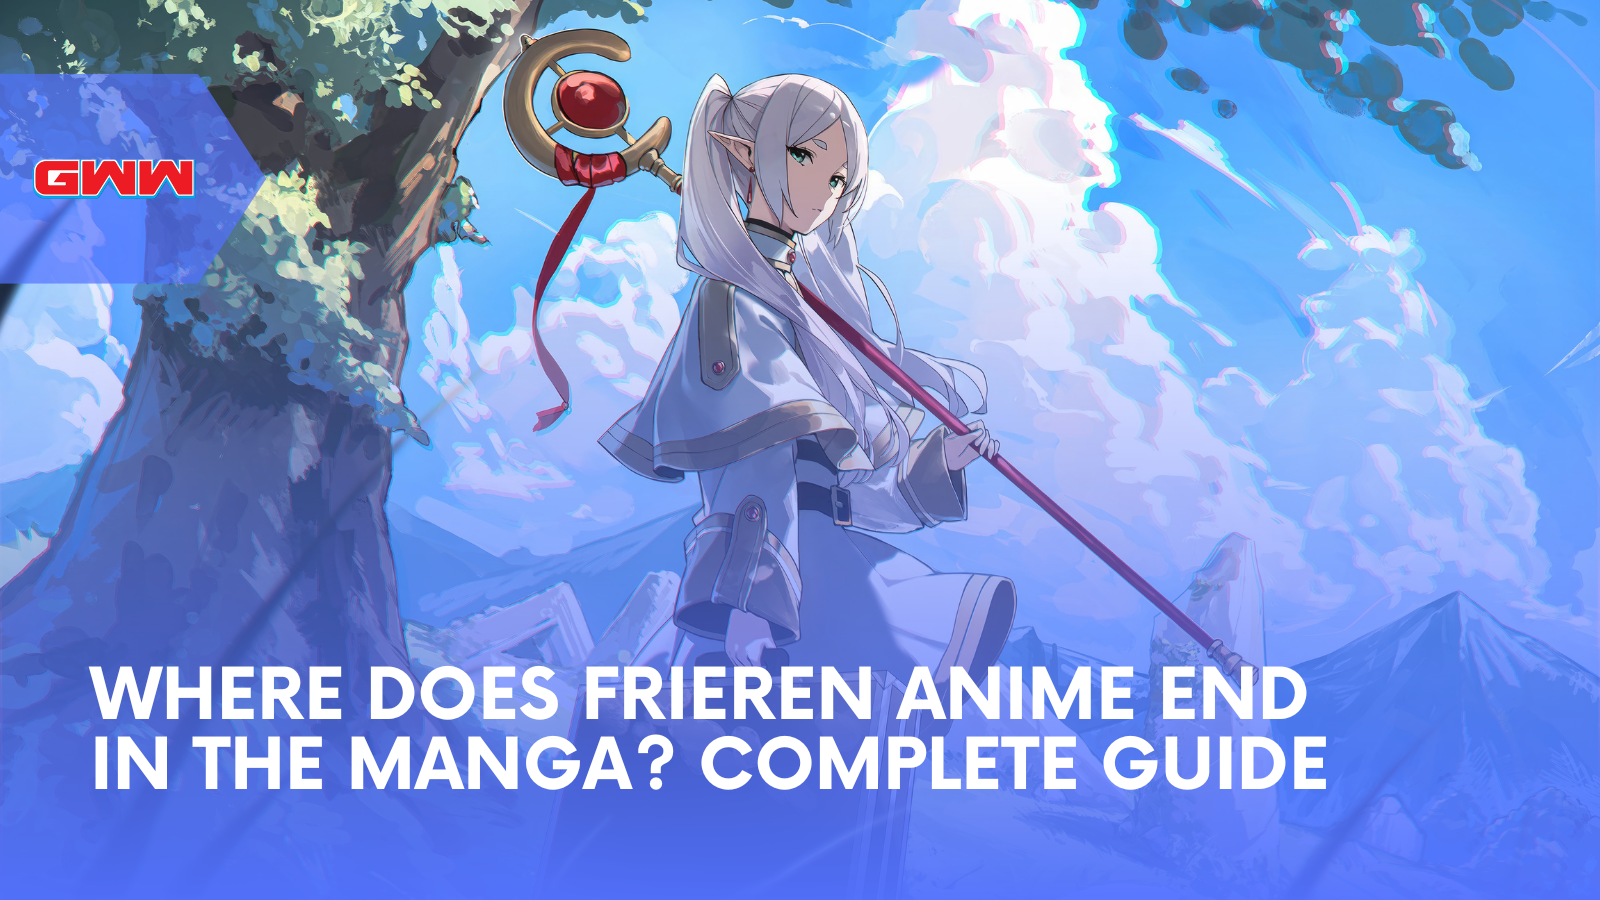 Where Does Frieren Anime End in the Manga? Complete Guide